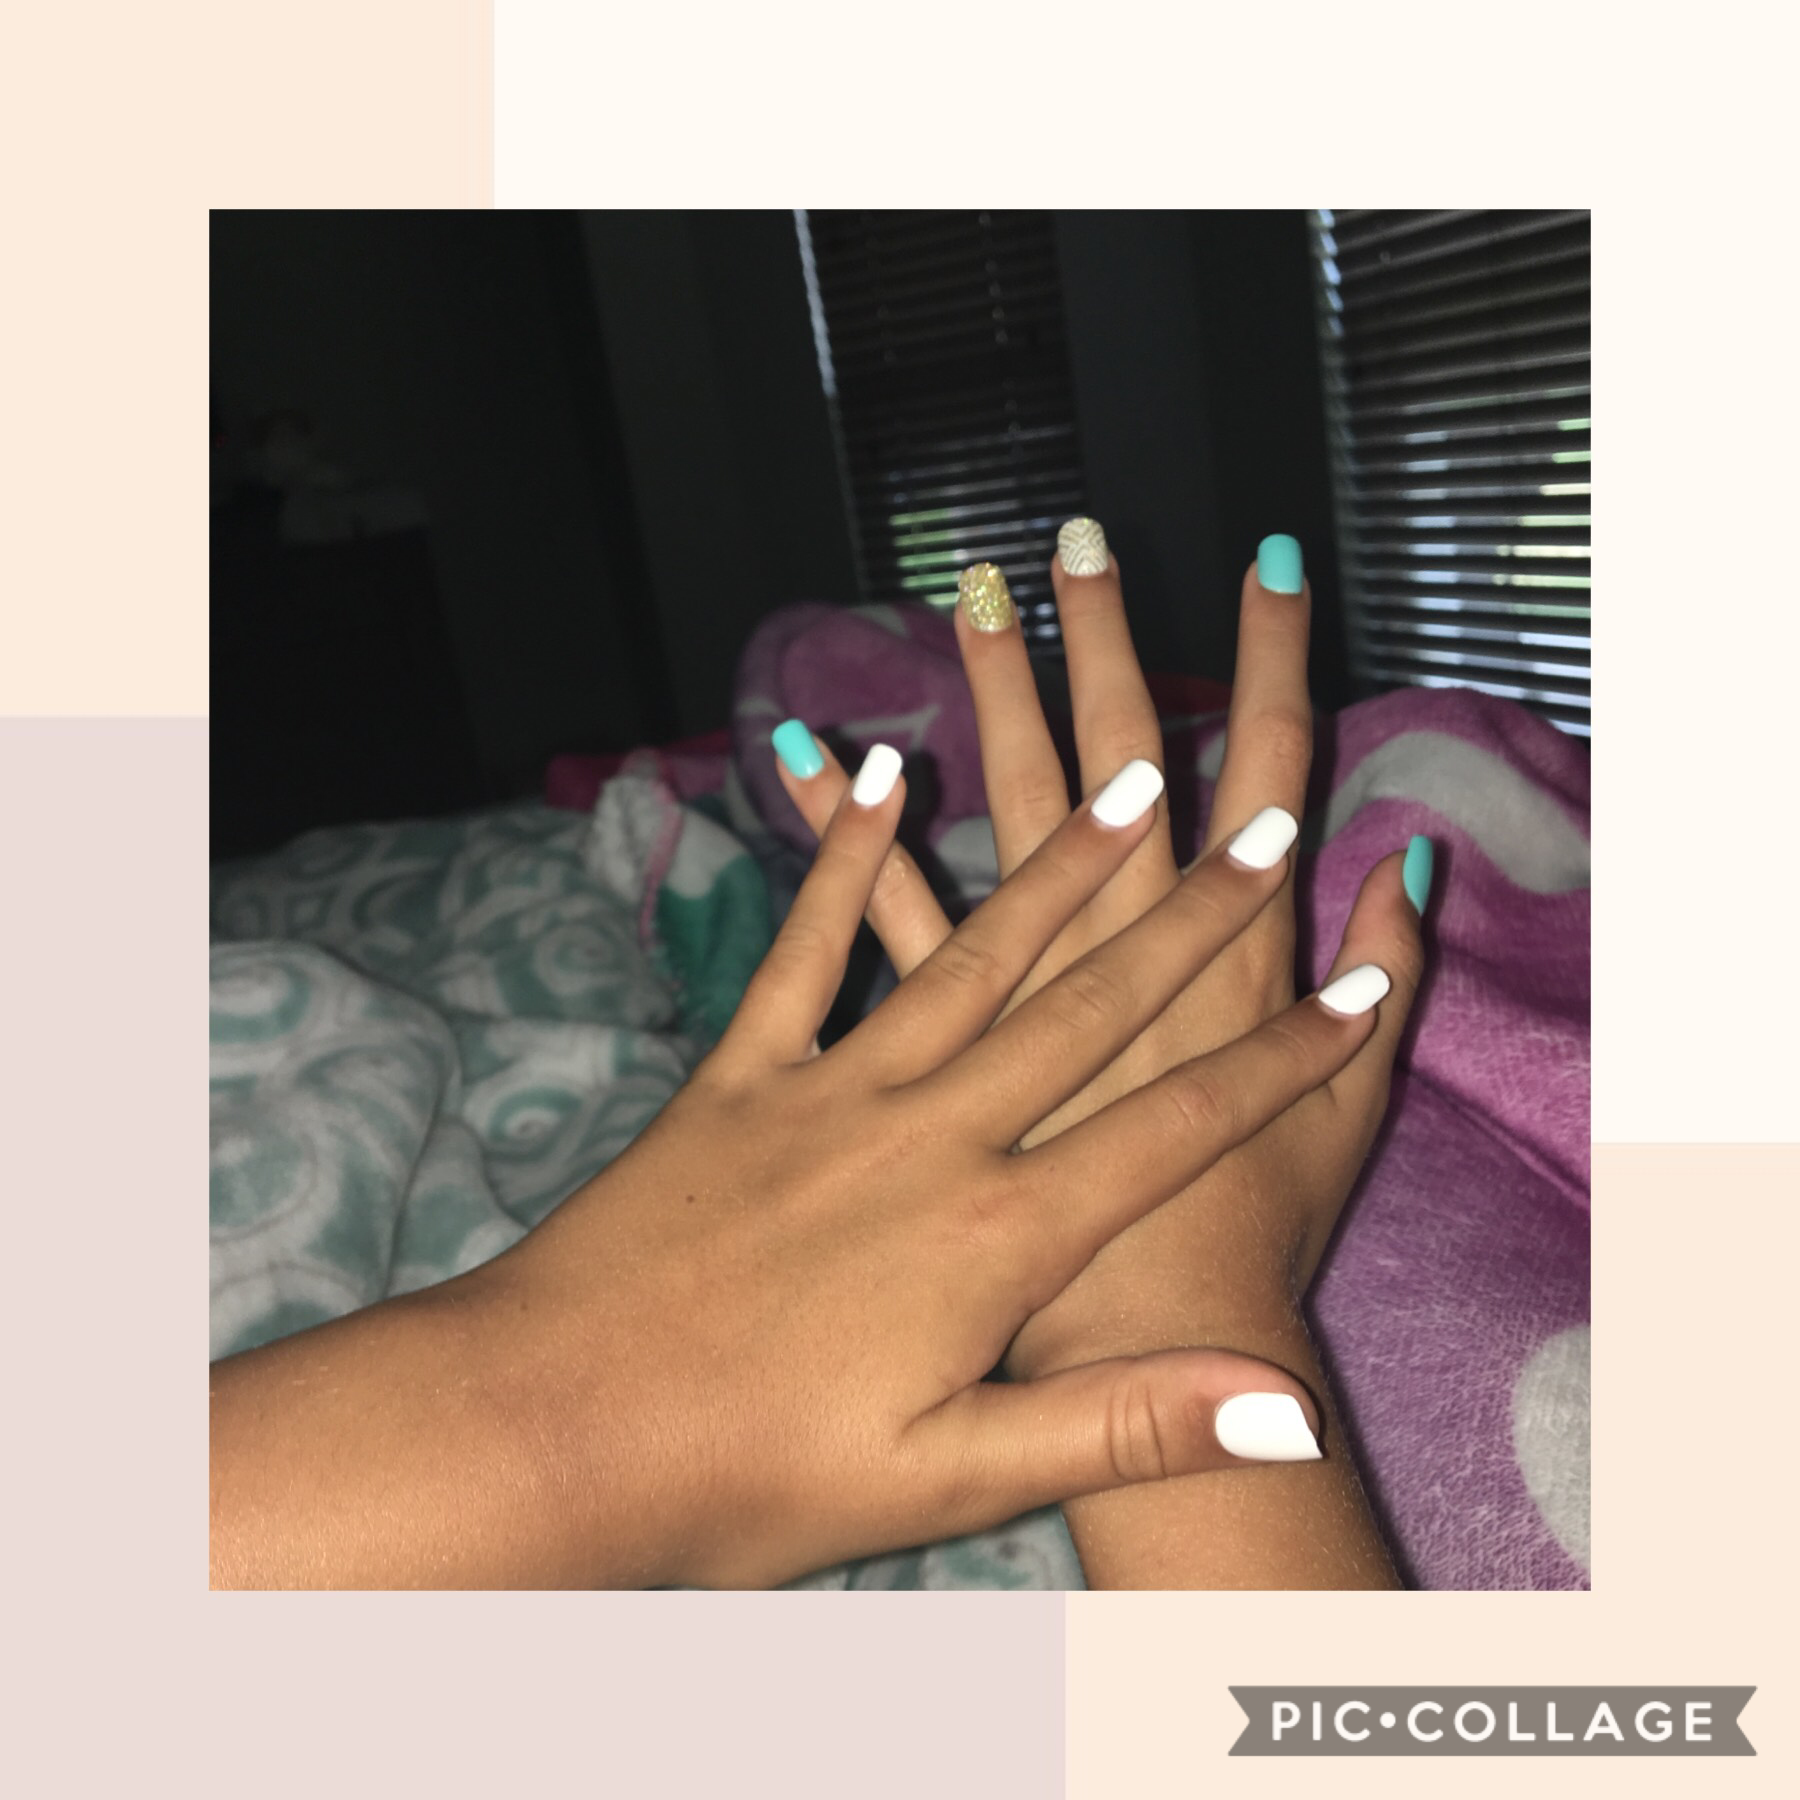 me and my sister got our nails done 